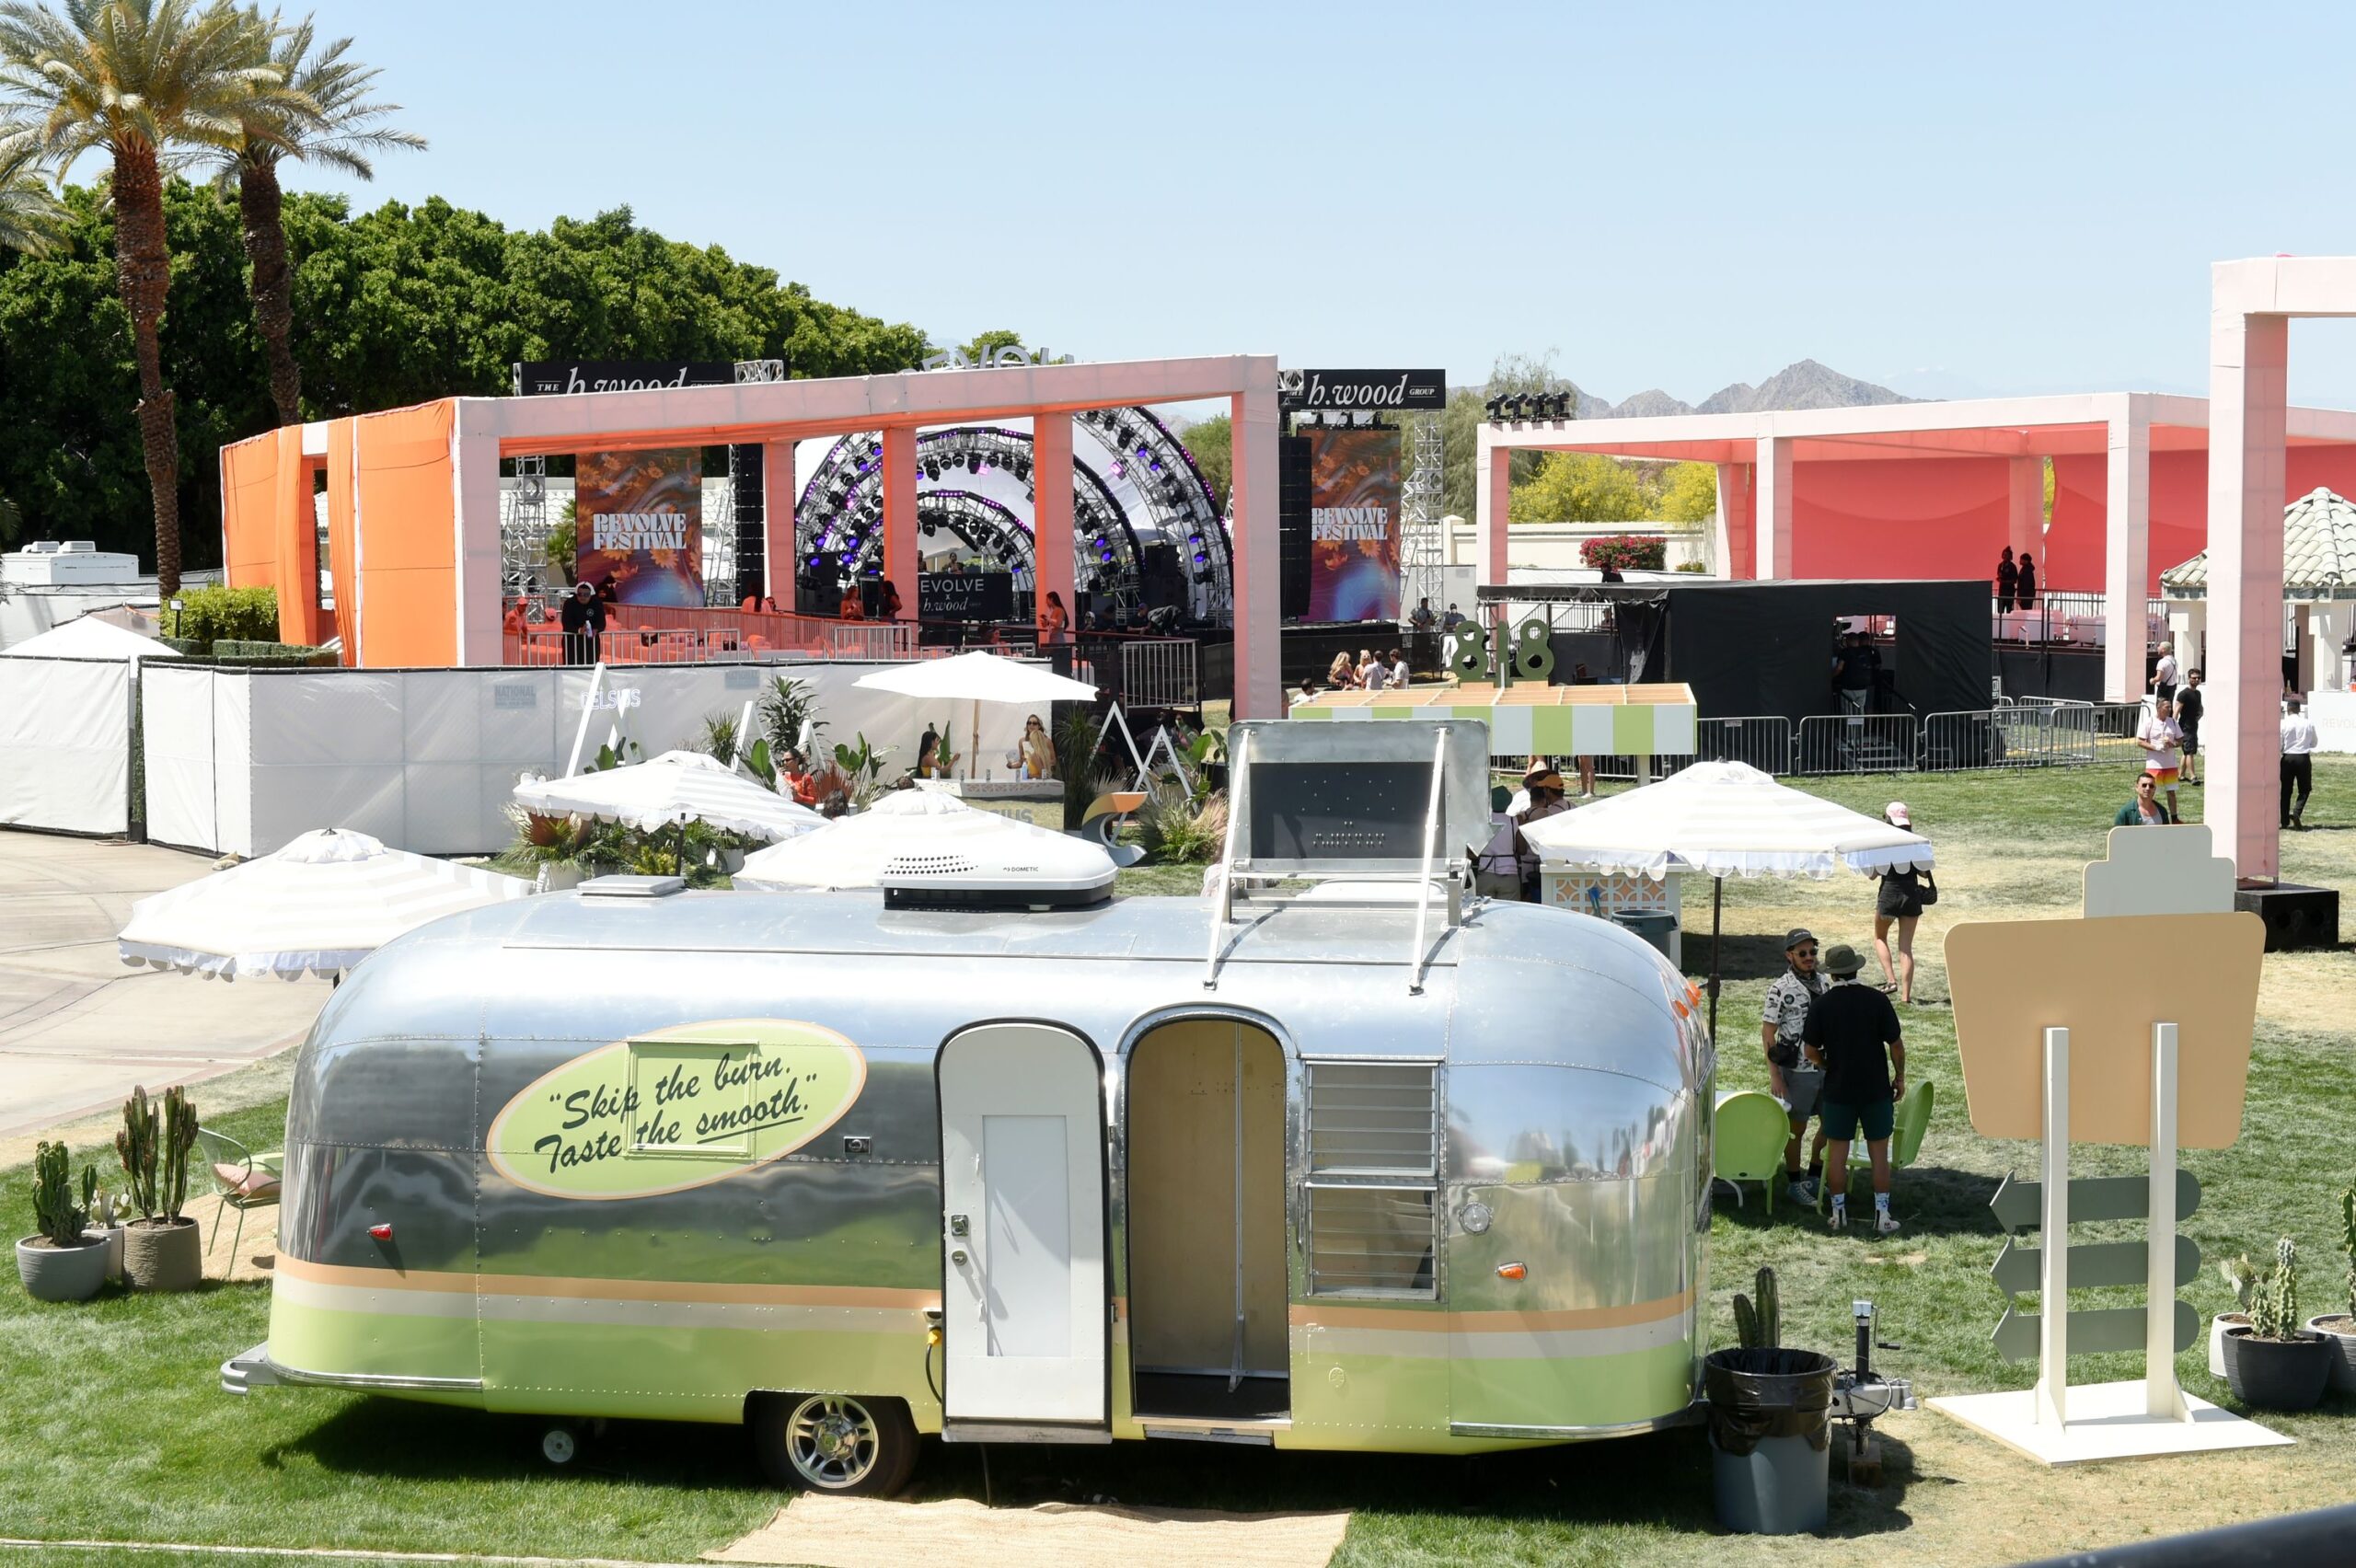 The back of the 818 Airstream with a view of the Revolve Festival stage.